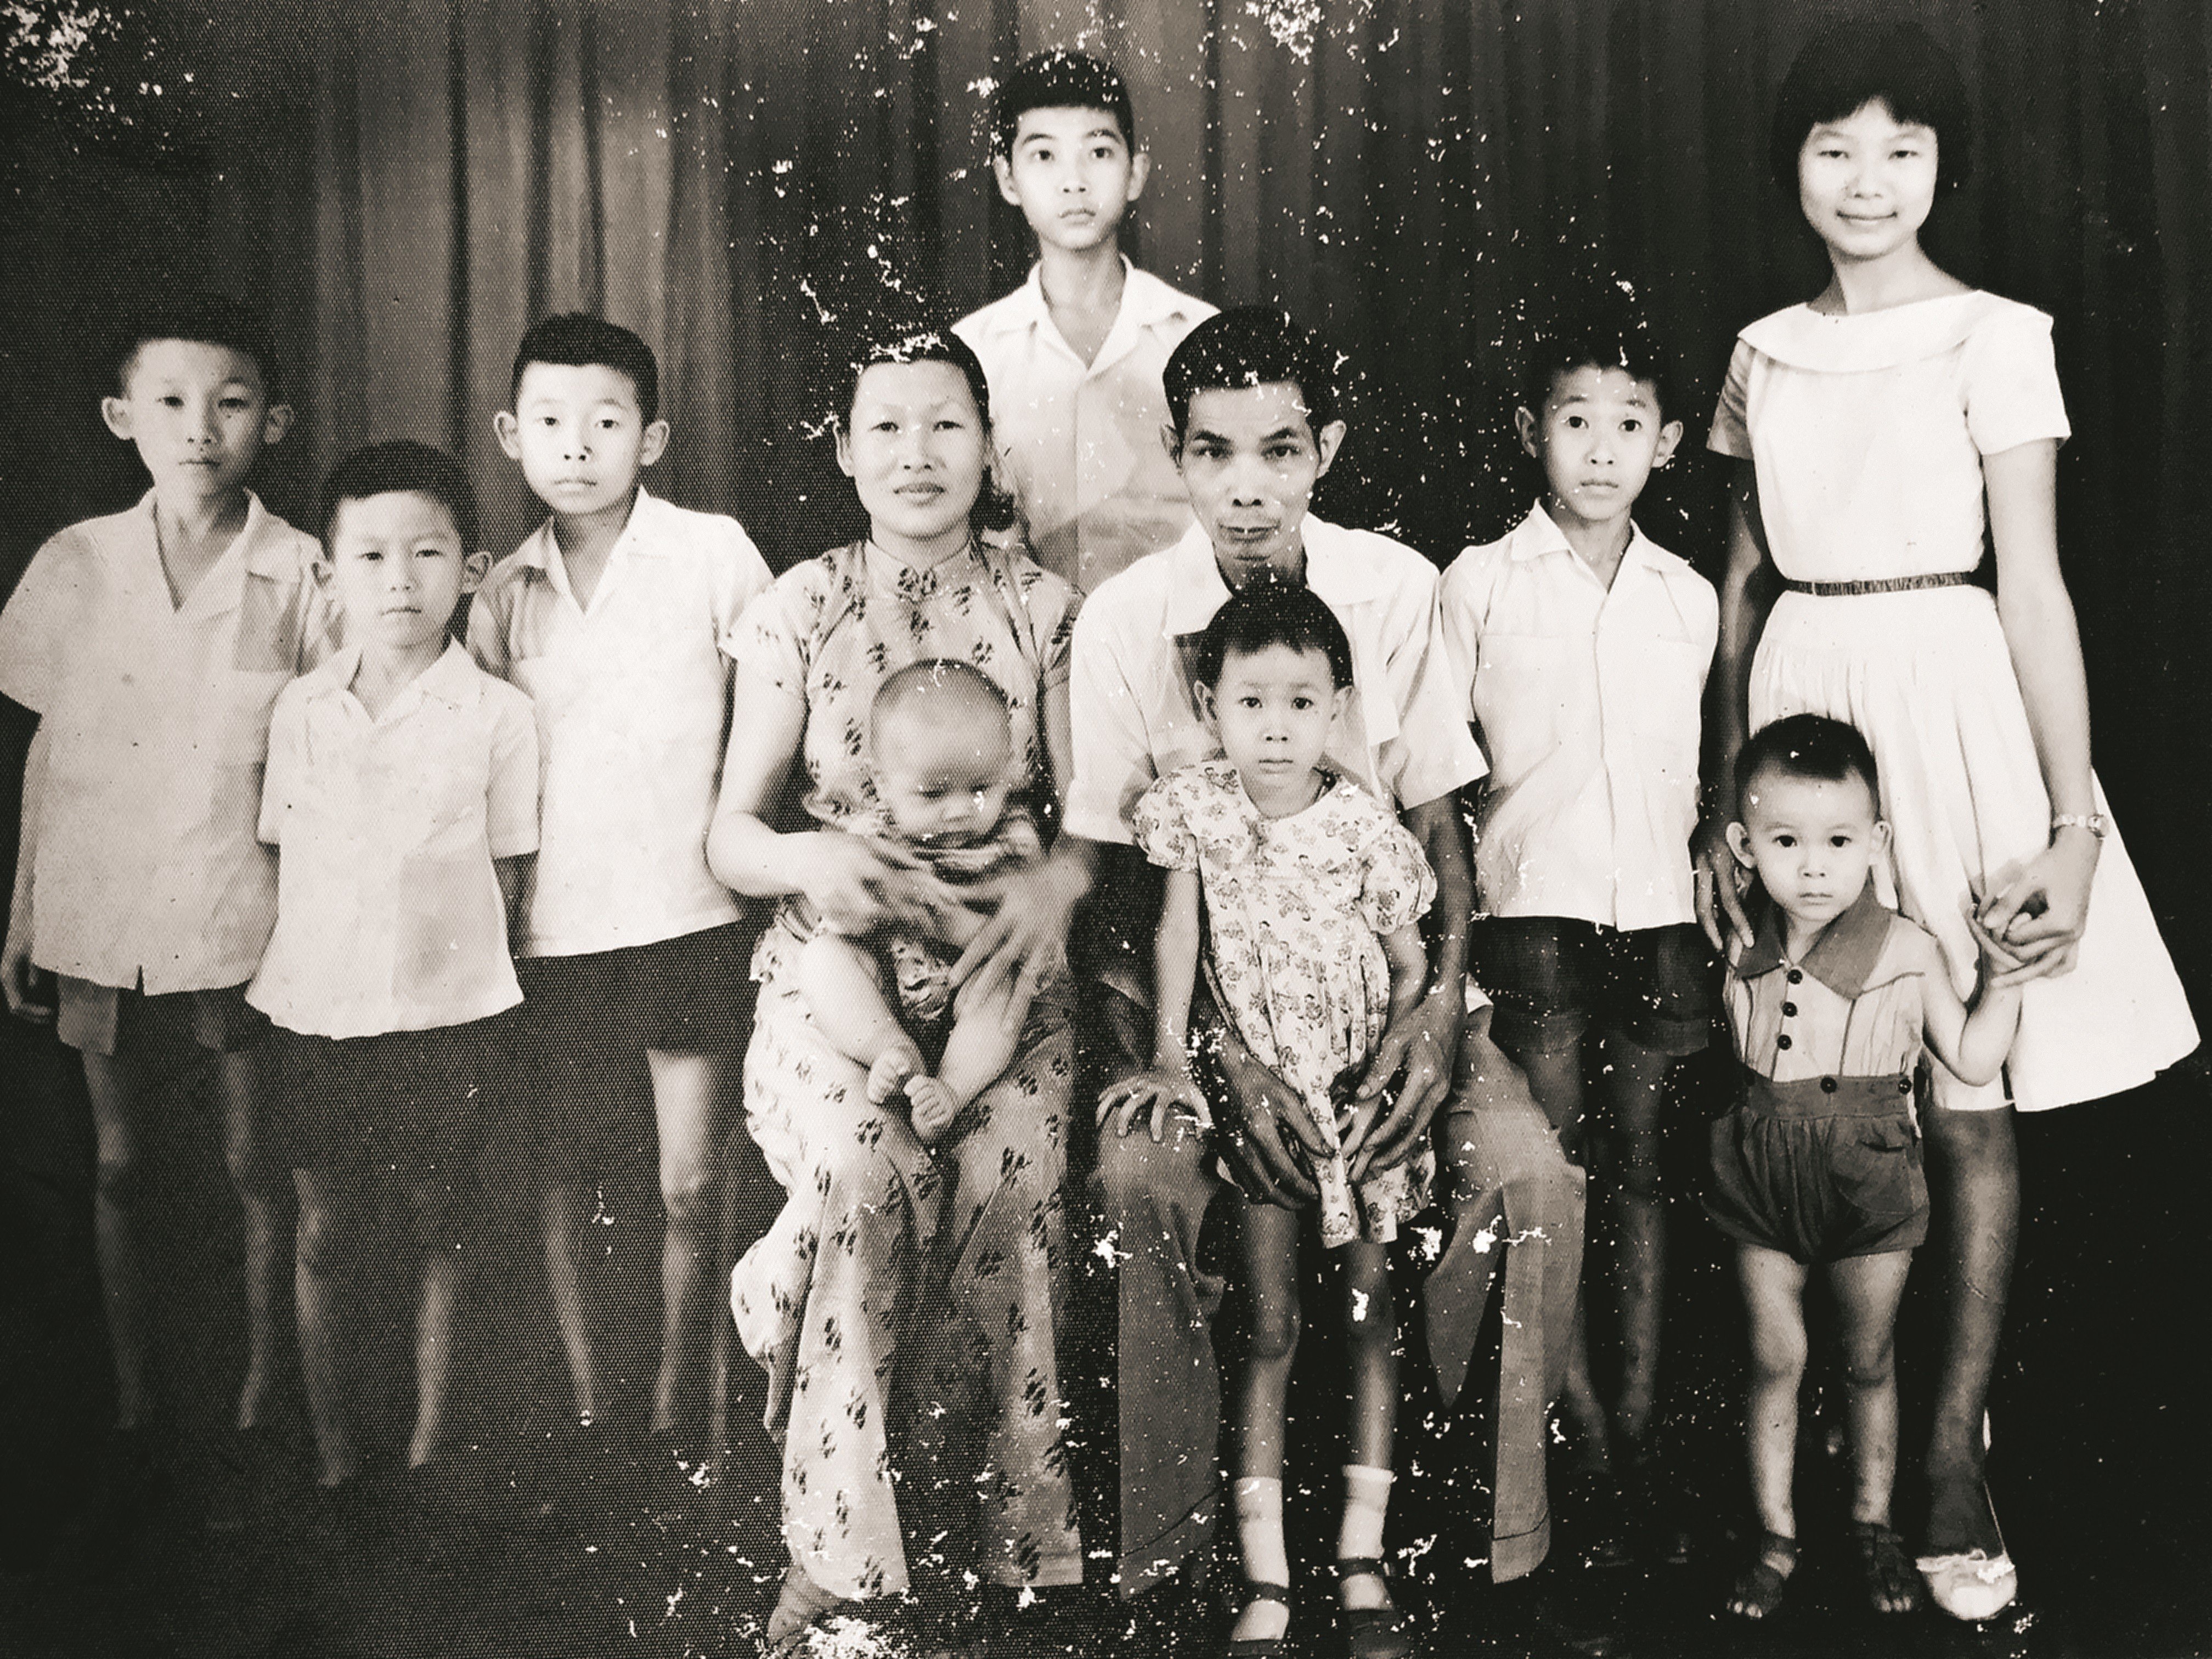 Wong Se Kong, since renamed Surya Widianto Wong, sits on his mother’s lap in this family photo from 1961. Photo: Stanley Widianto